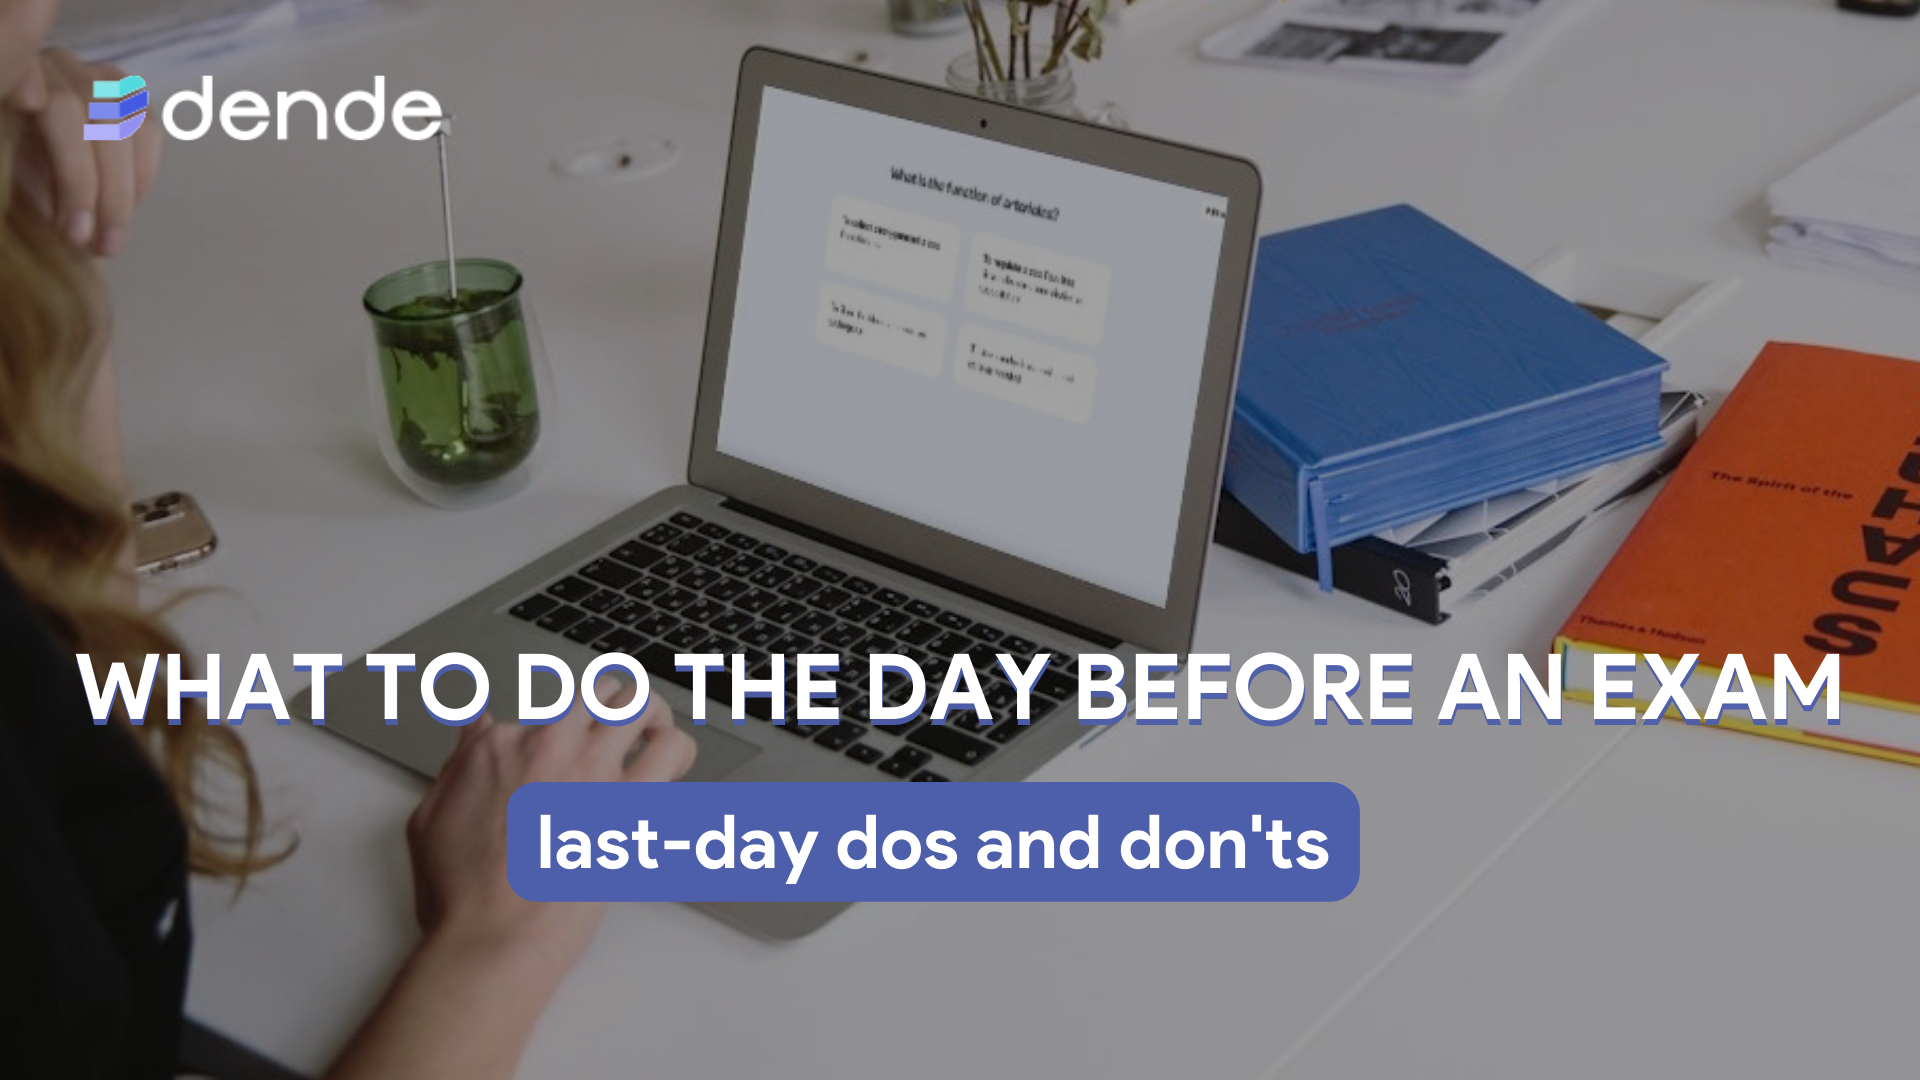 What to do the day before an exam: last-day dos and don’ts